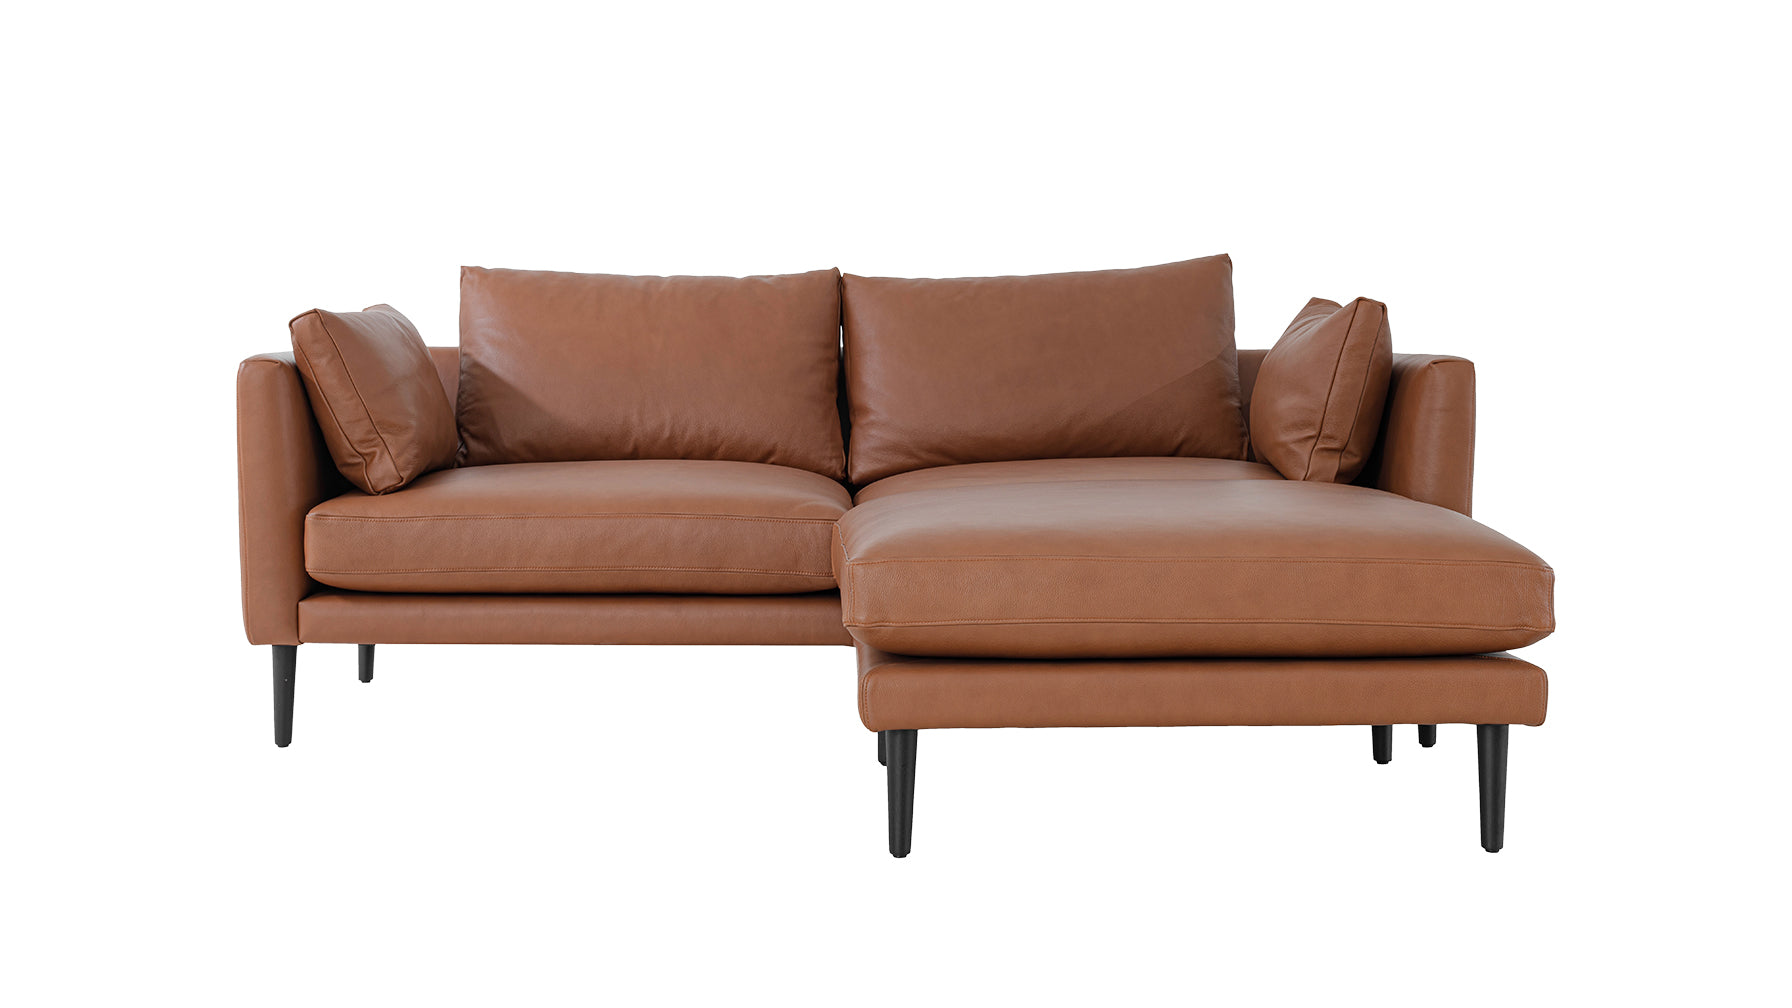 Stay A While Sectional, 2.5 Seater, Cigar - Image 10